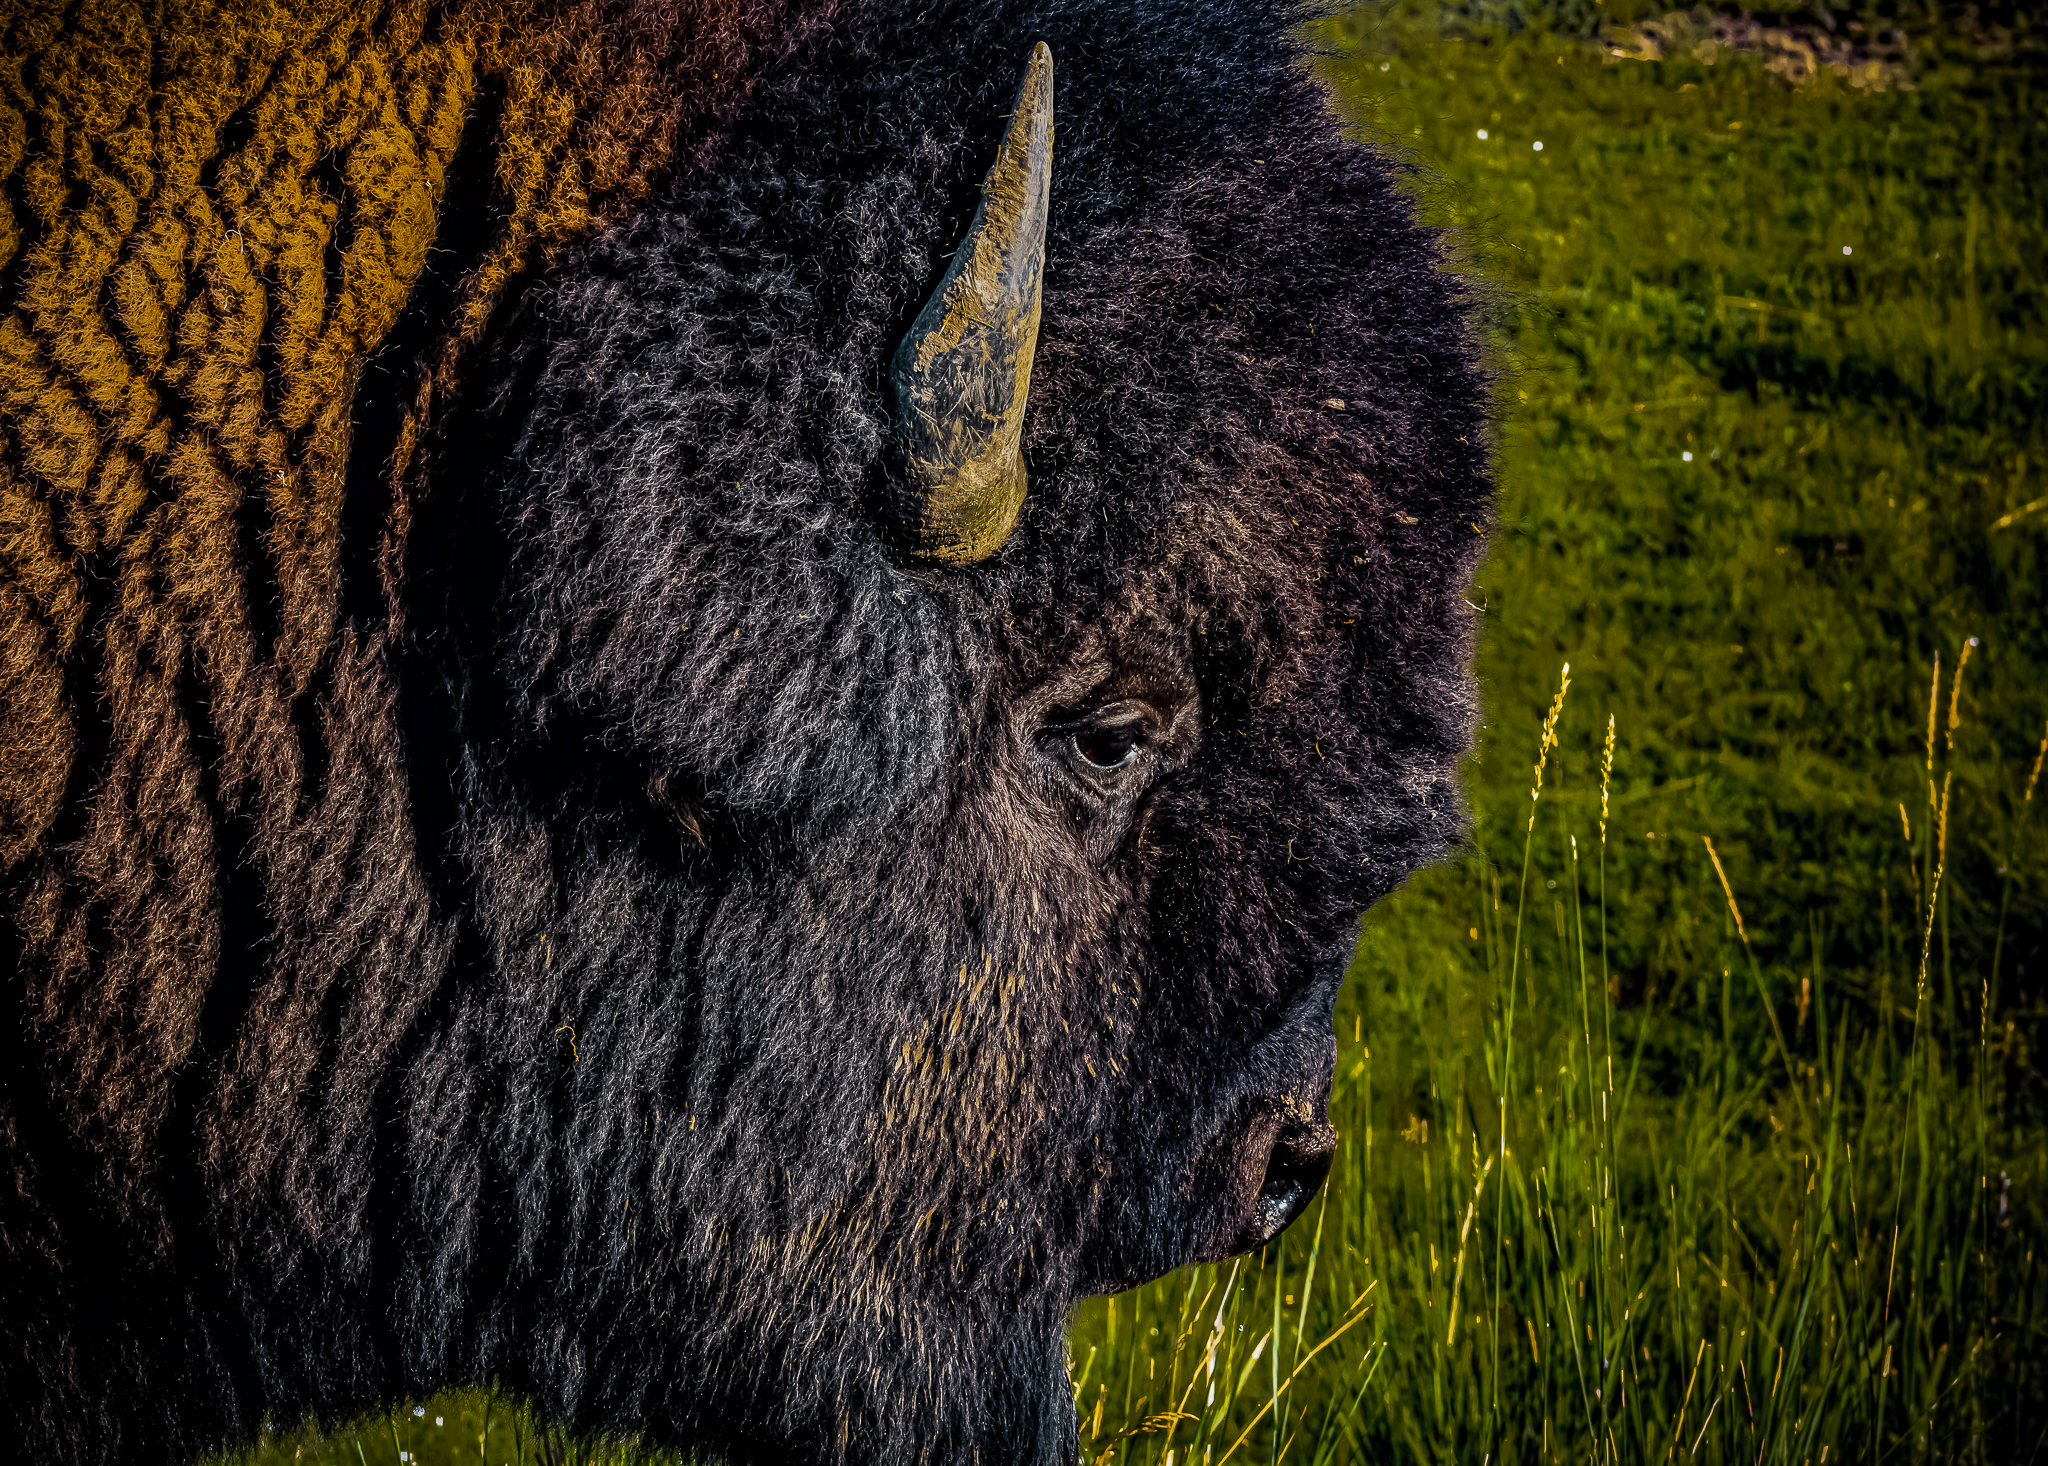 American bison in Yellowstone National Park in Wyoming.